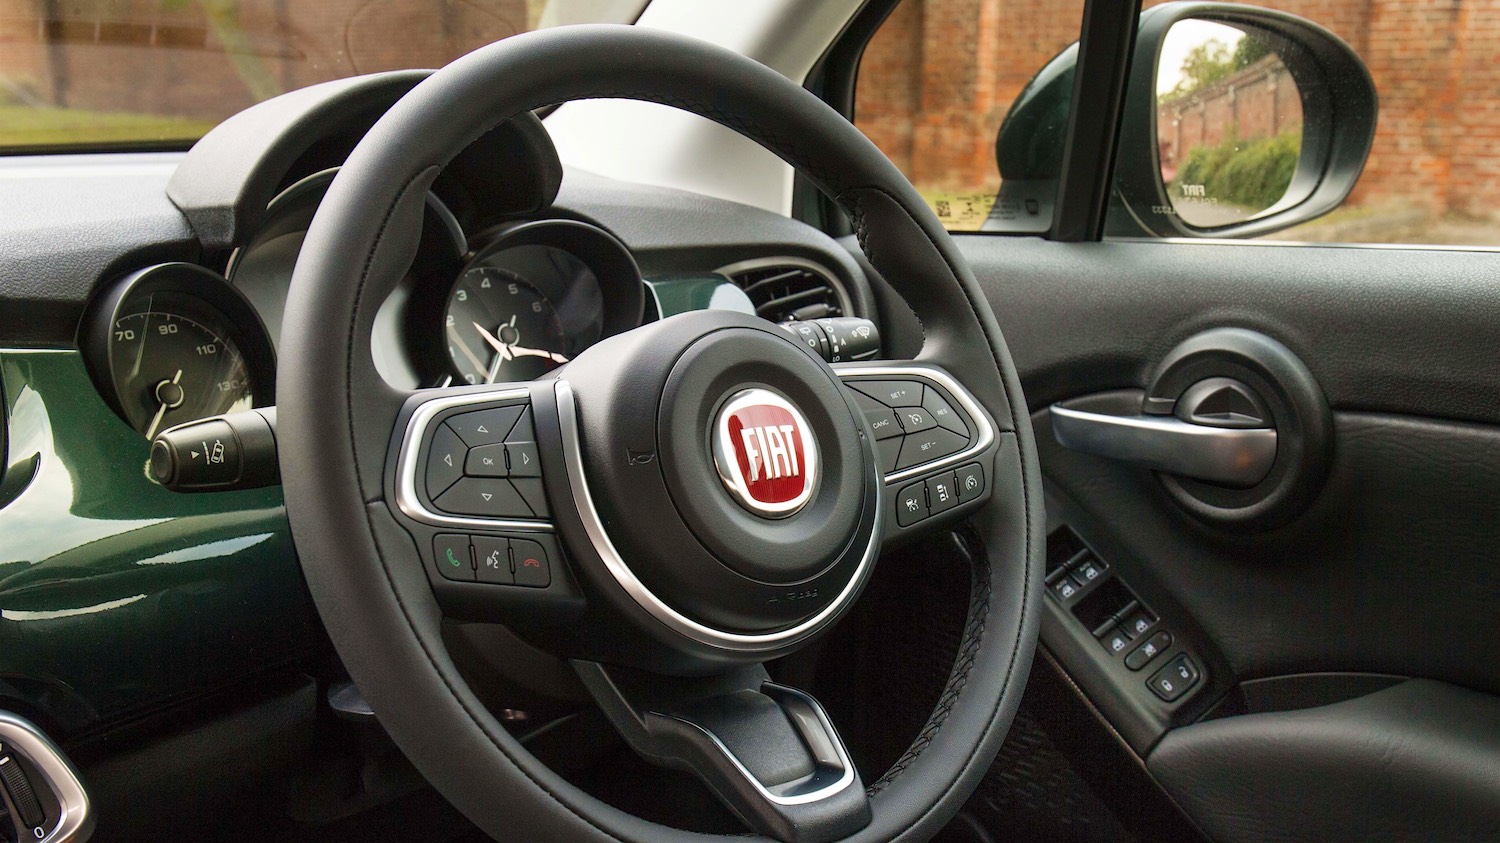 Drive Co Uk Reviewed The 2019 New Fiat 500x New Look Tech